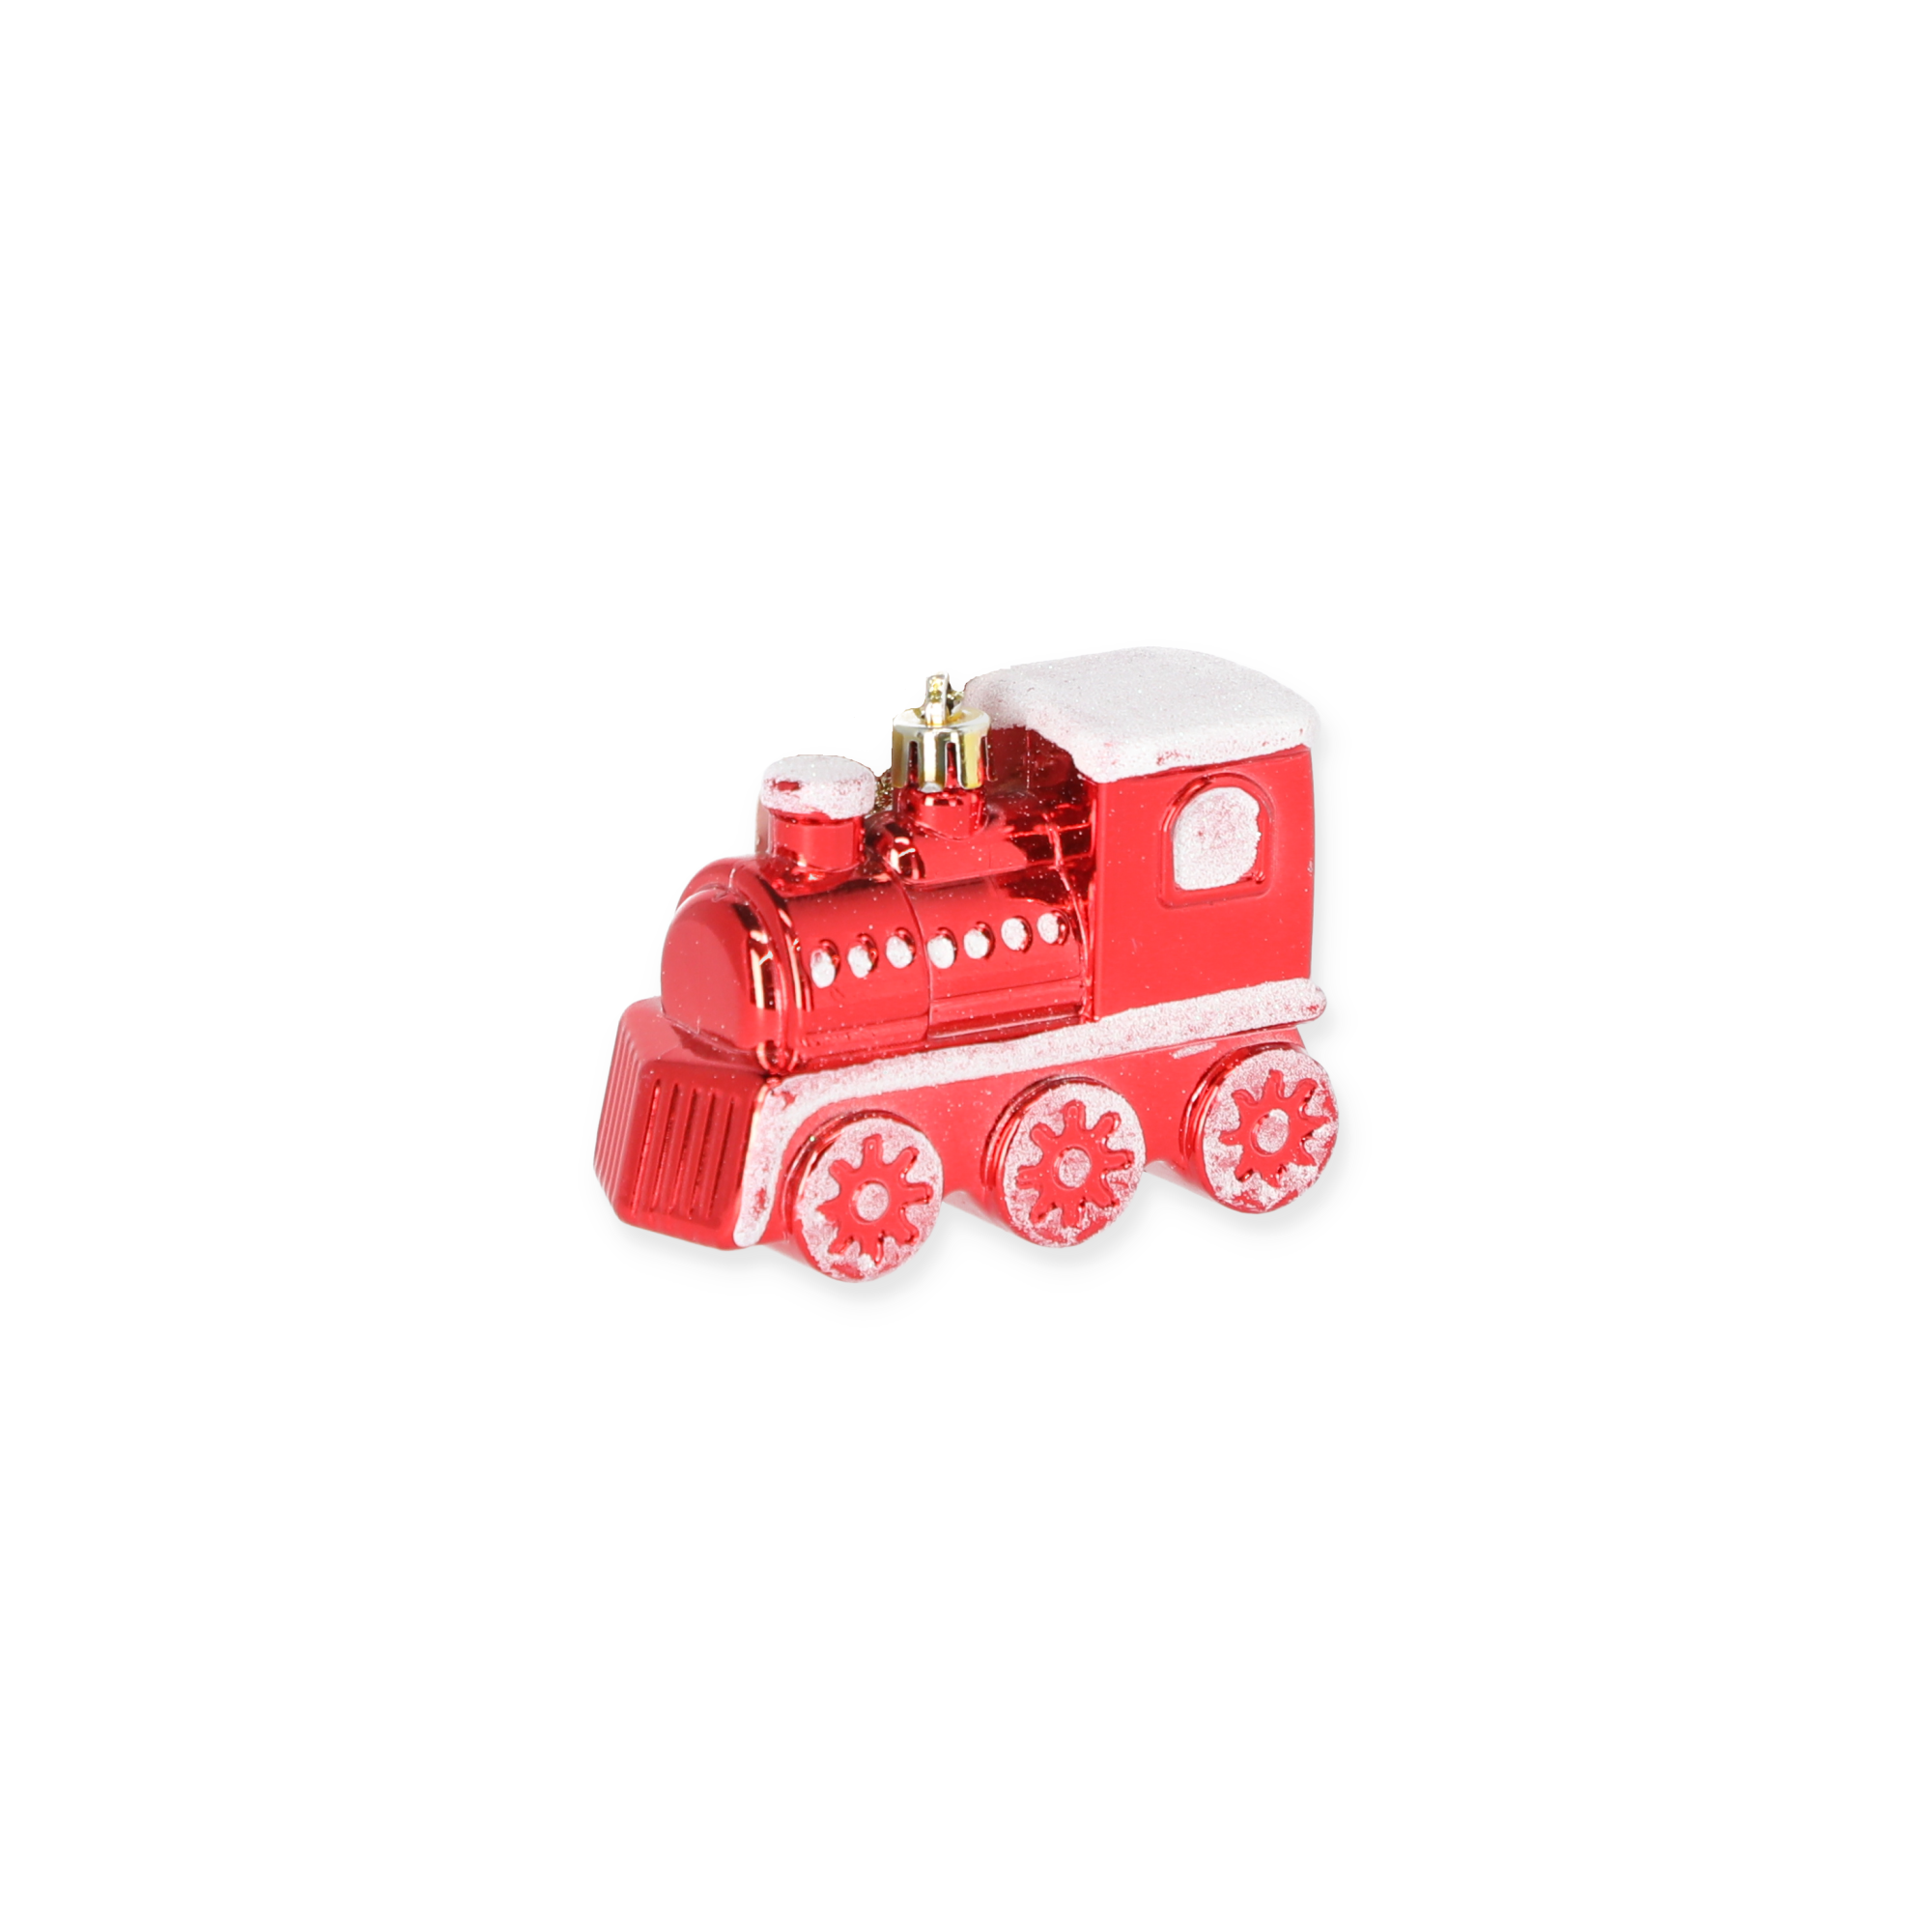 Christbaumschmuck Zug rot 9,5 x 6,5 cm + product picture